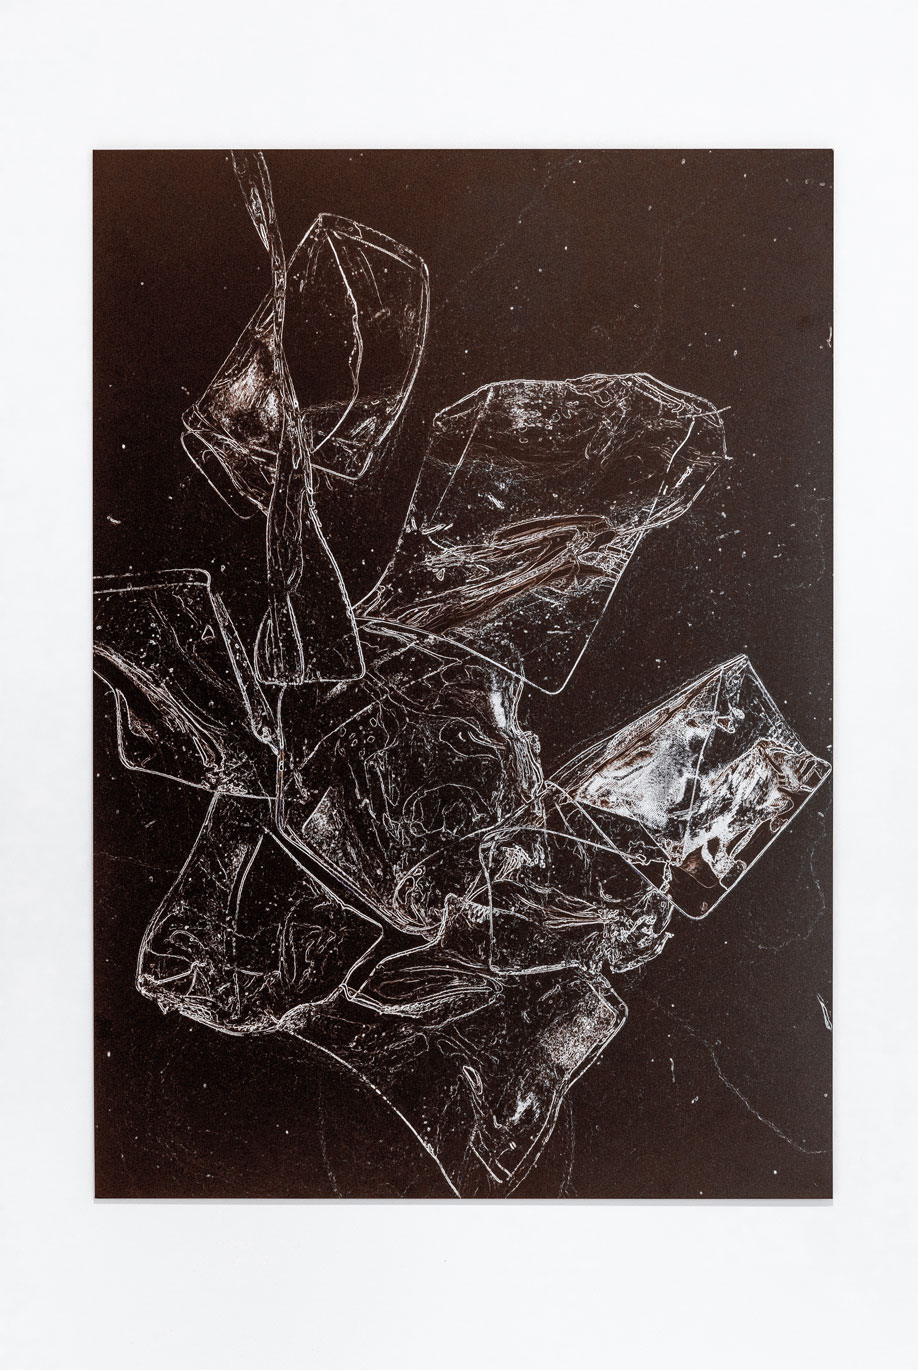 <b>Title: </b>Planet Zero 1<br /><b>Medium: </b>Photographs of collage made from glass, ;melted fresnel sense, wood, paper, UV printed on steel<br />